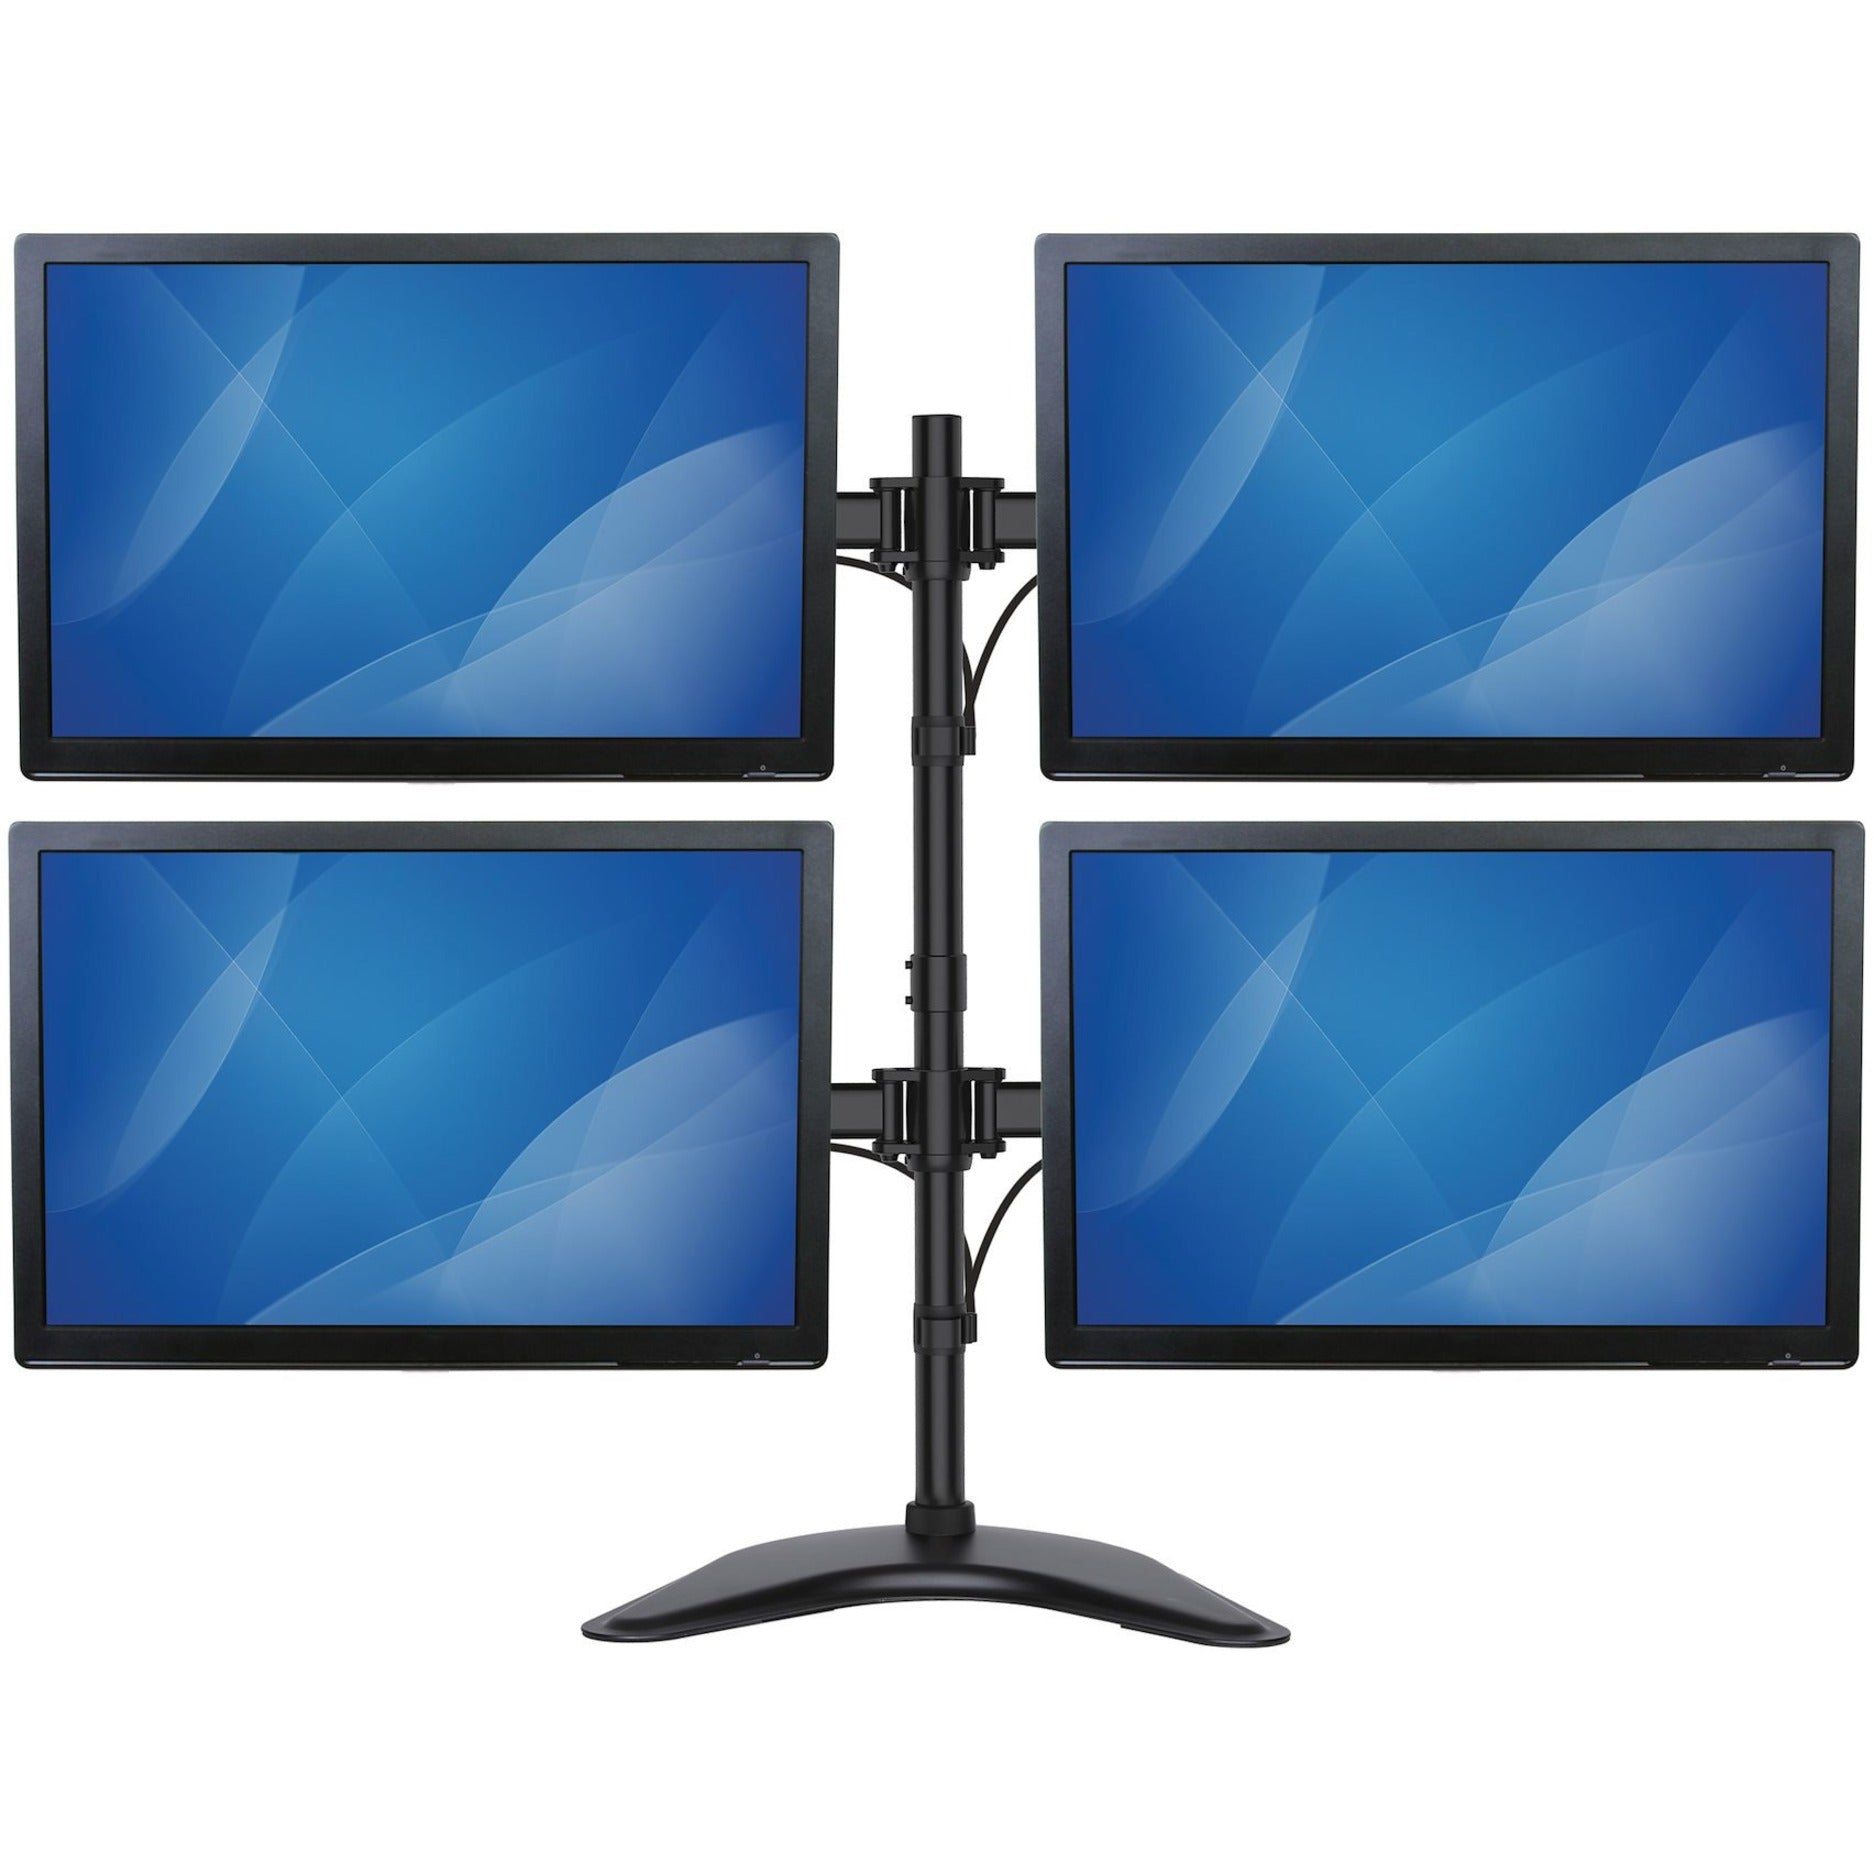 StarTech.com ARMBARQUAD Quad-Monitor Desktop Stand - Adjustable 4 Monitor Stand, VESA Mount, Up to 27in, Heavy Duty Steel